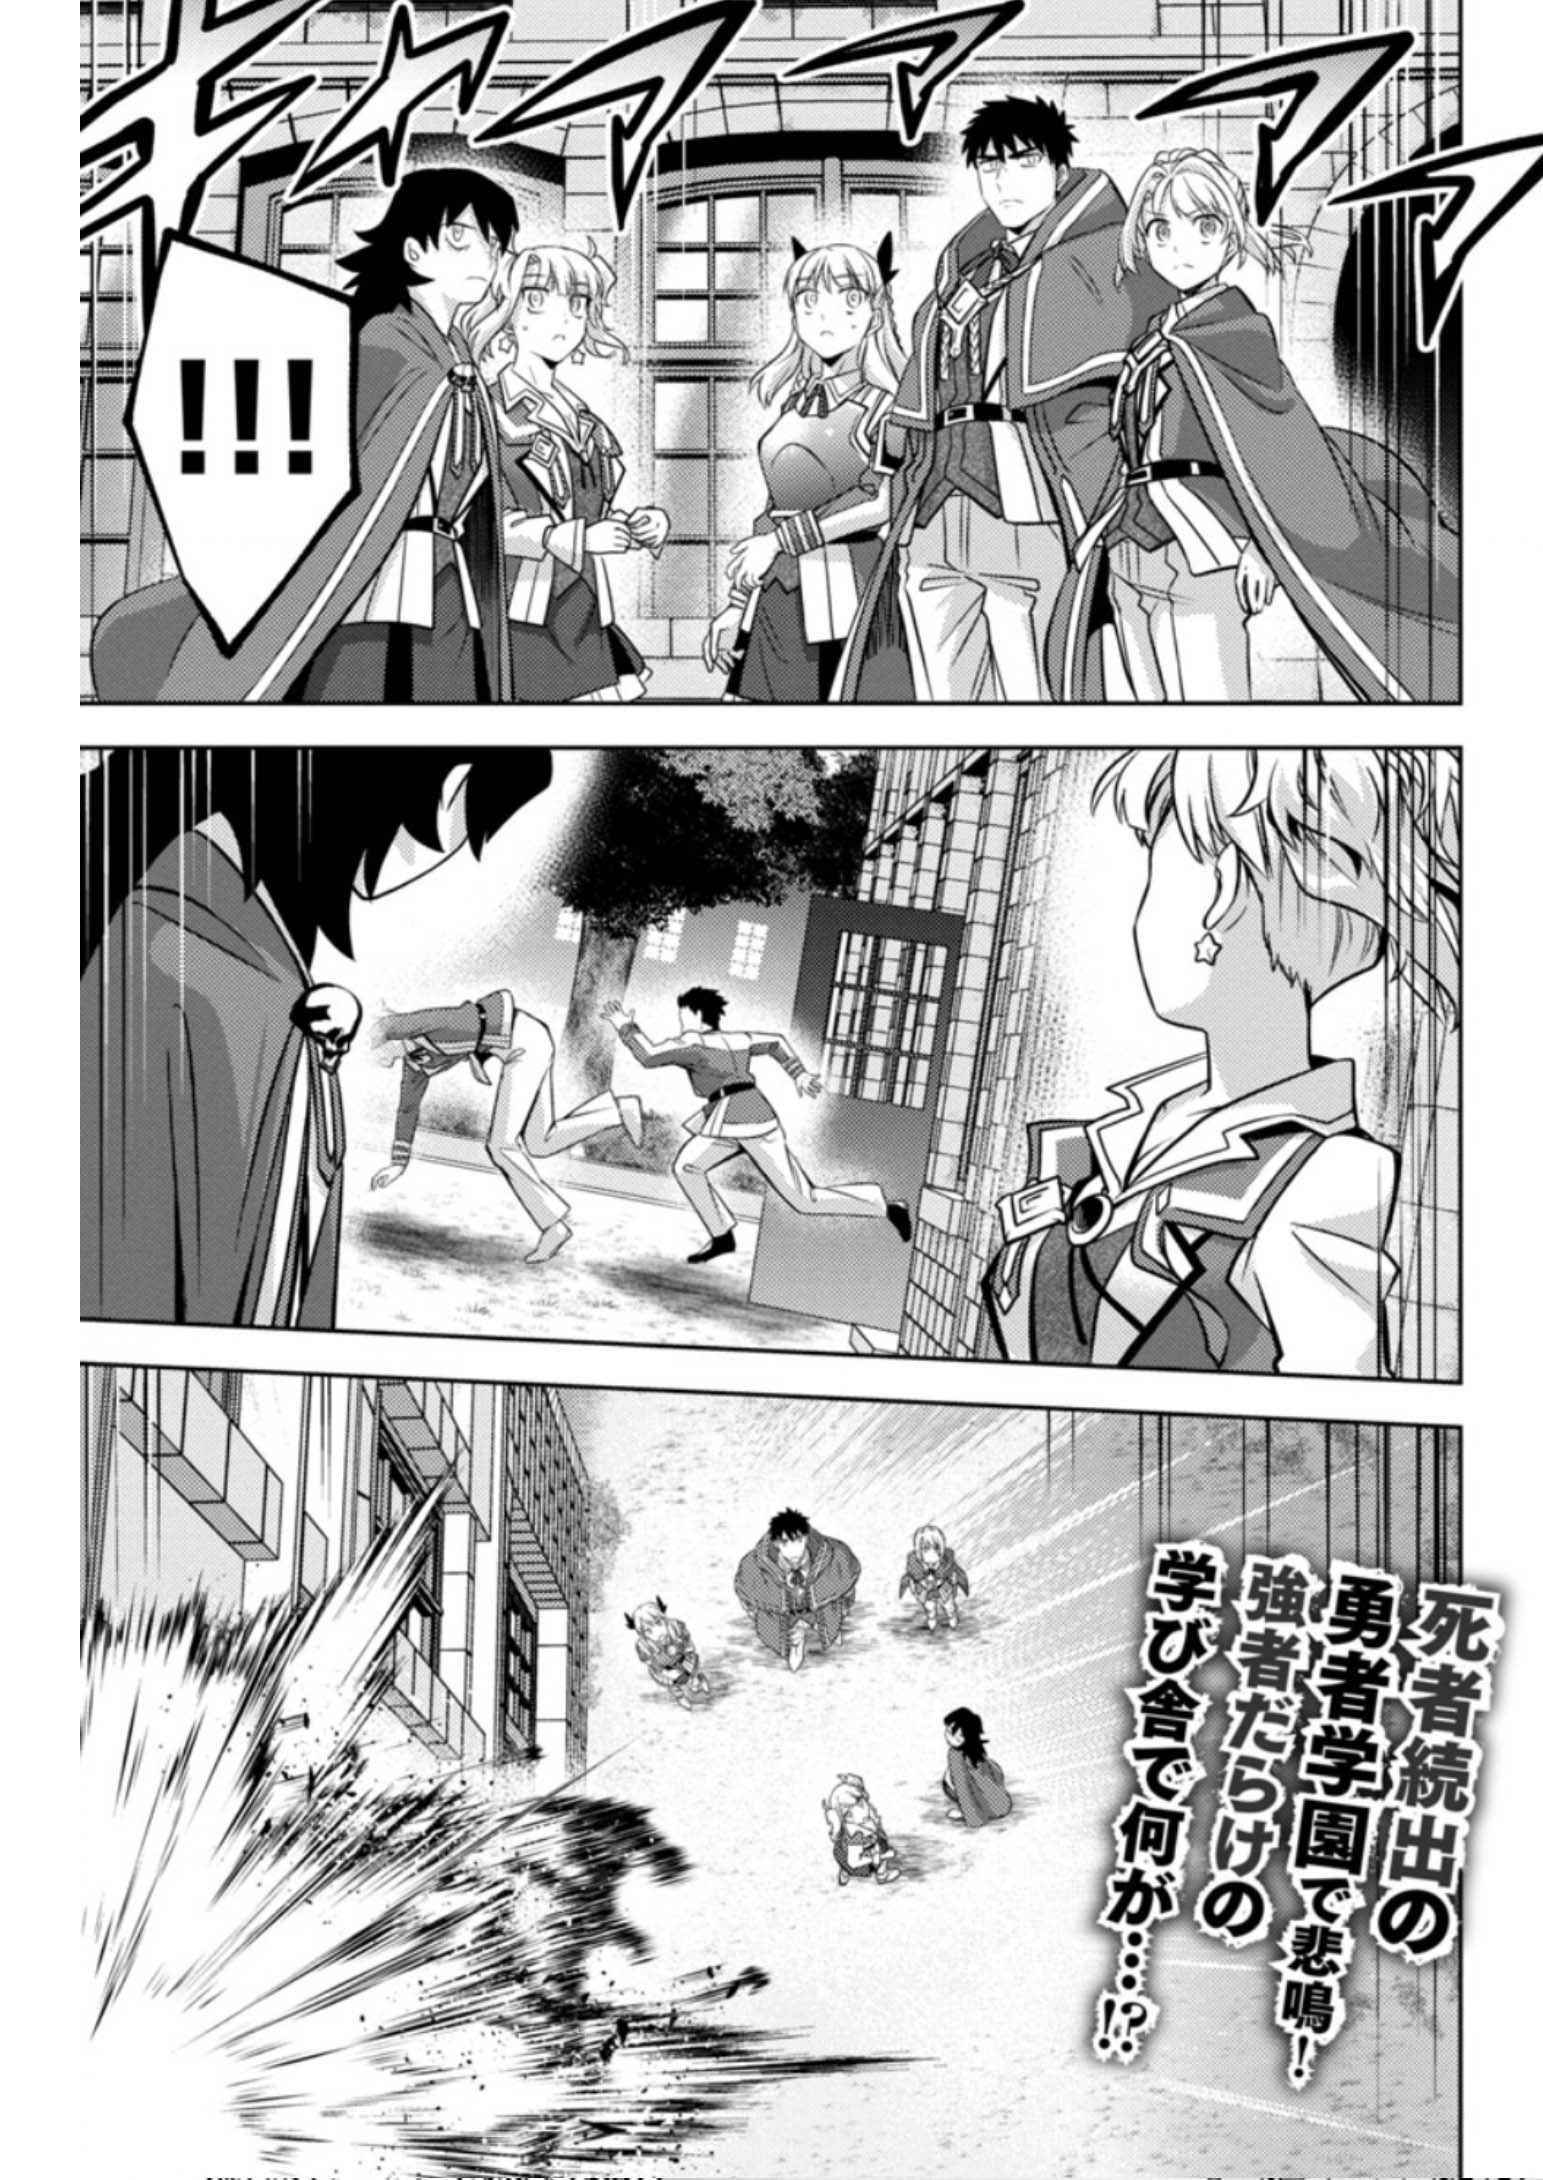 The Reincarnated Swordsman With 9999 Strength Wants To Become A Magician! - Page 2